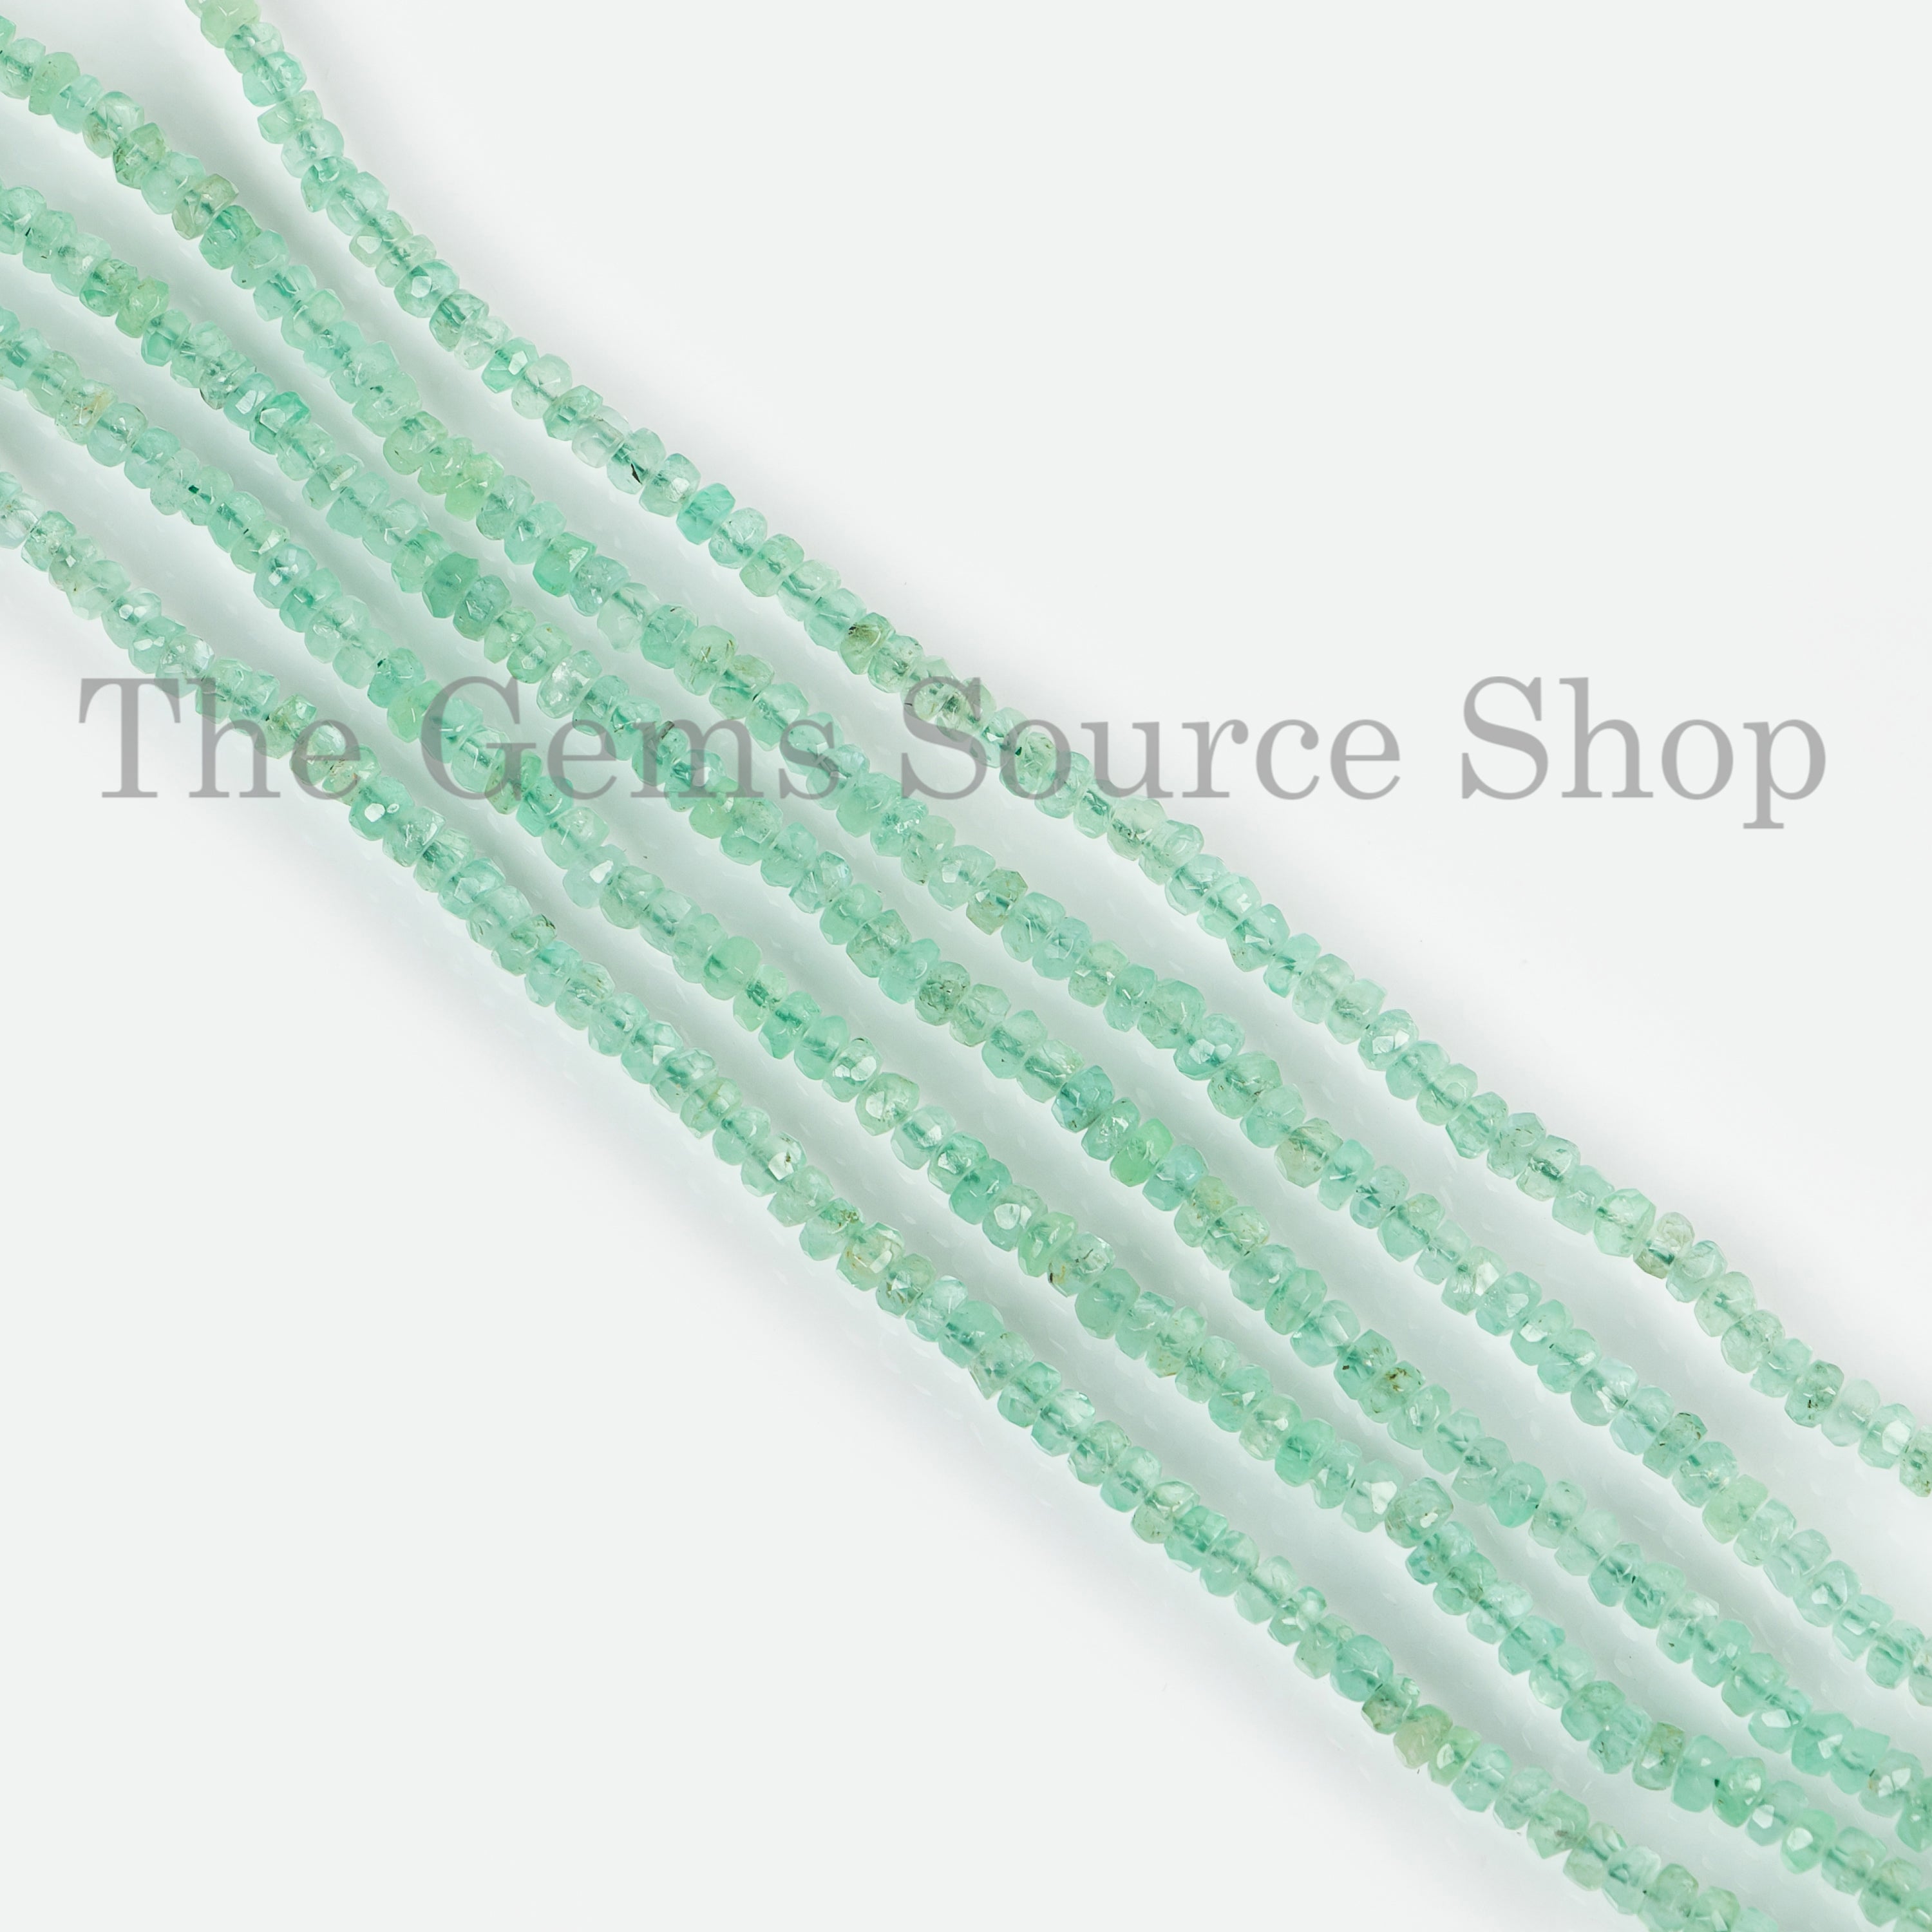 2.5-3 mm Emerald Faceted Rondelle Wholesale Loose Gemstone Beads, TGS-4497